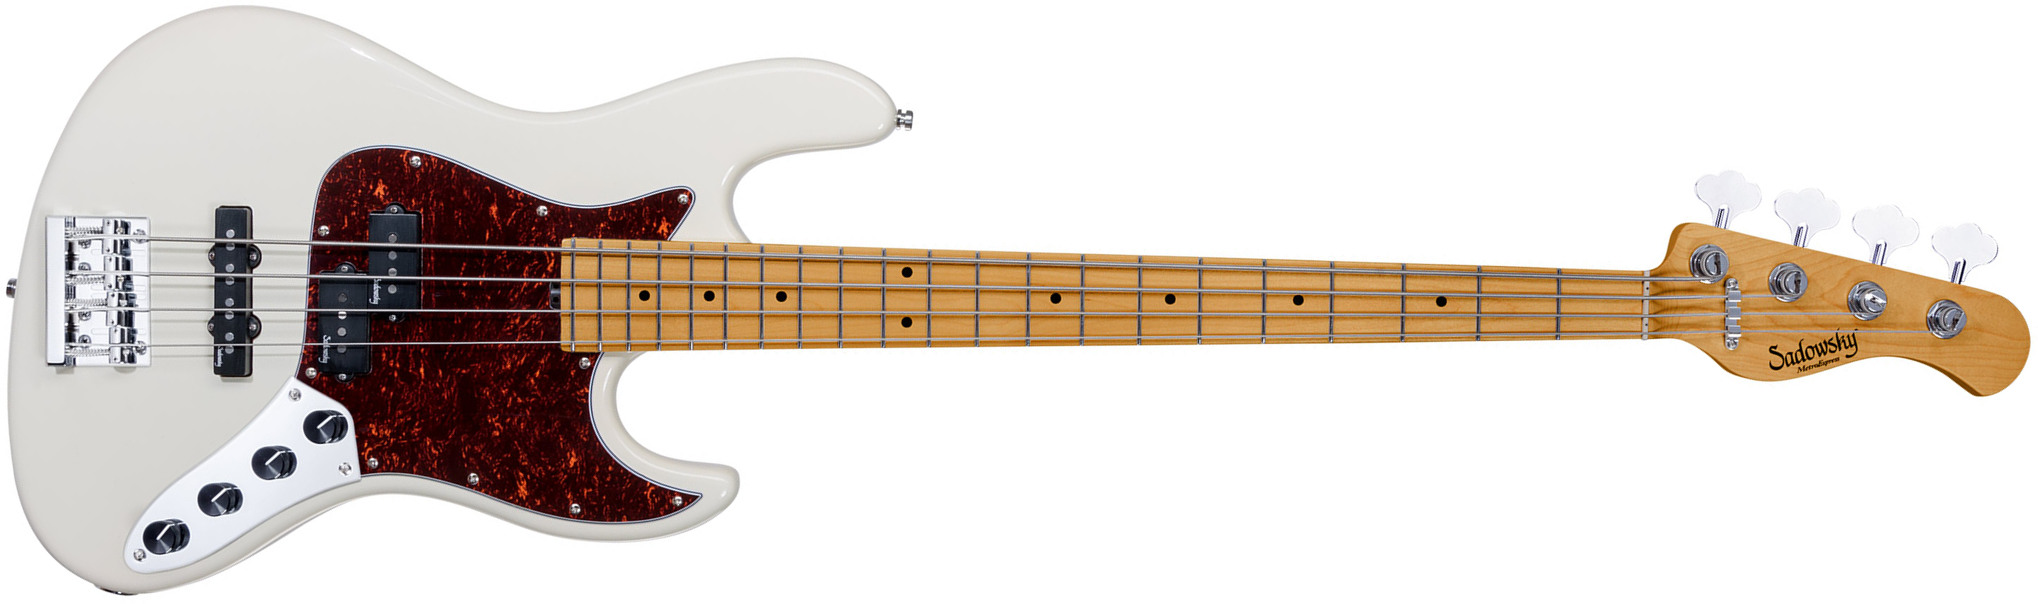 Sadowsky Hybrid Pj Bass 21 Fret 4c Metroexpress V2 Mn - Olympic White - Solid body electric bass - Main picture